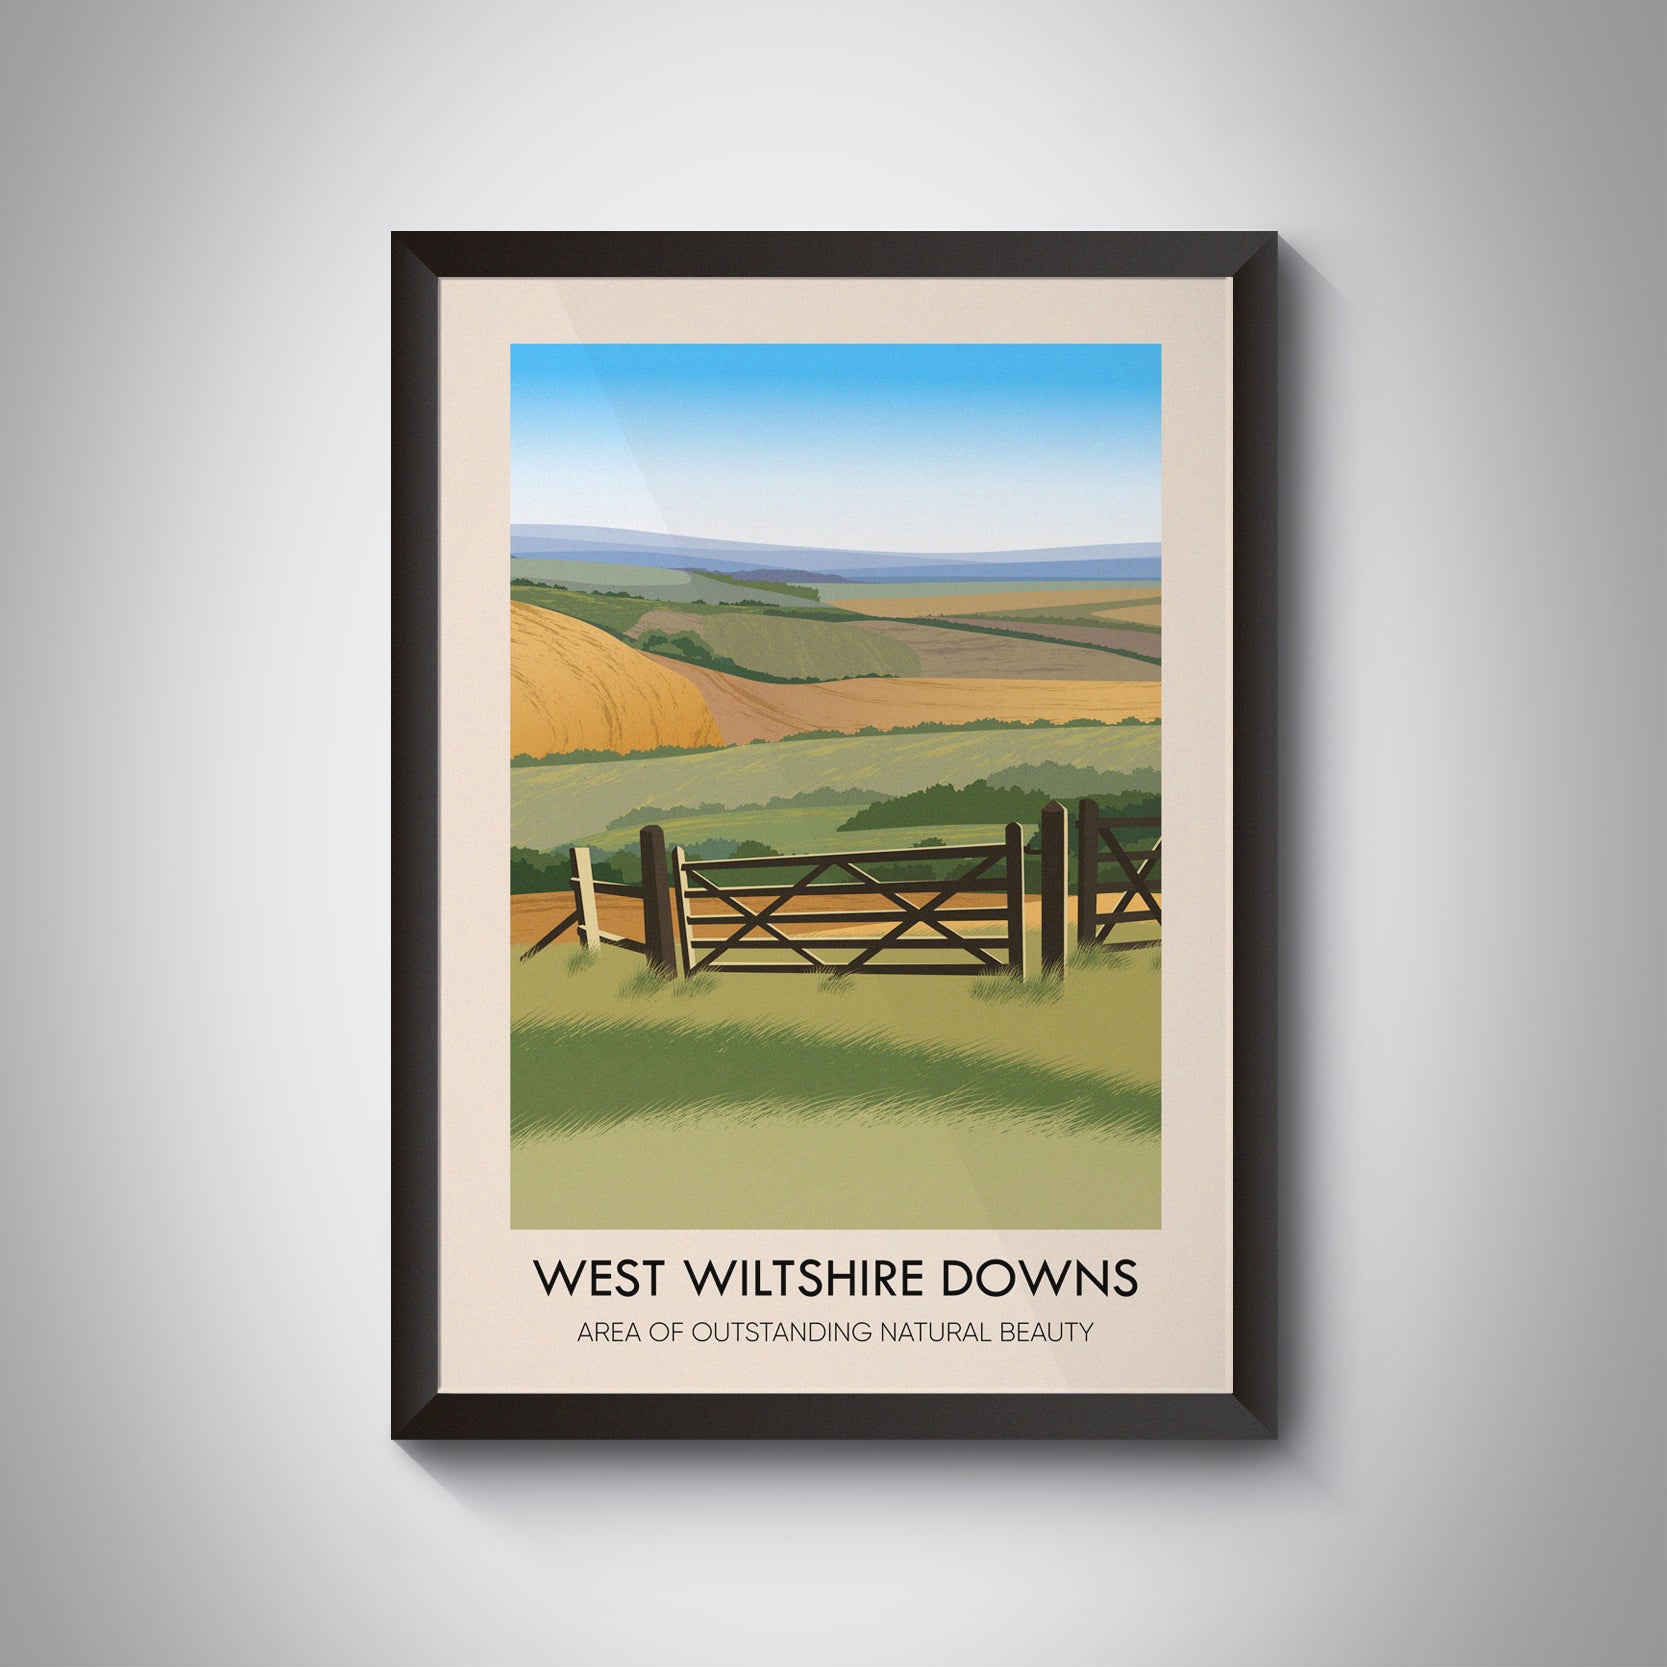 West Wiltshire Downs AONB Travel Poster